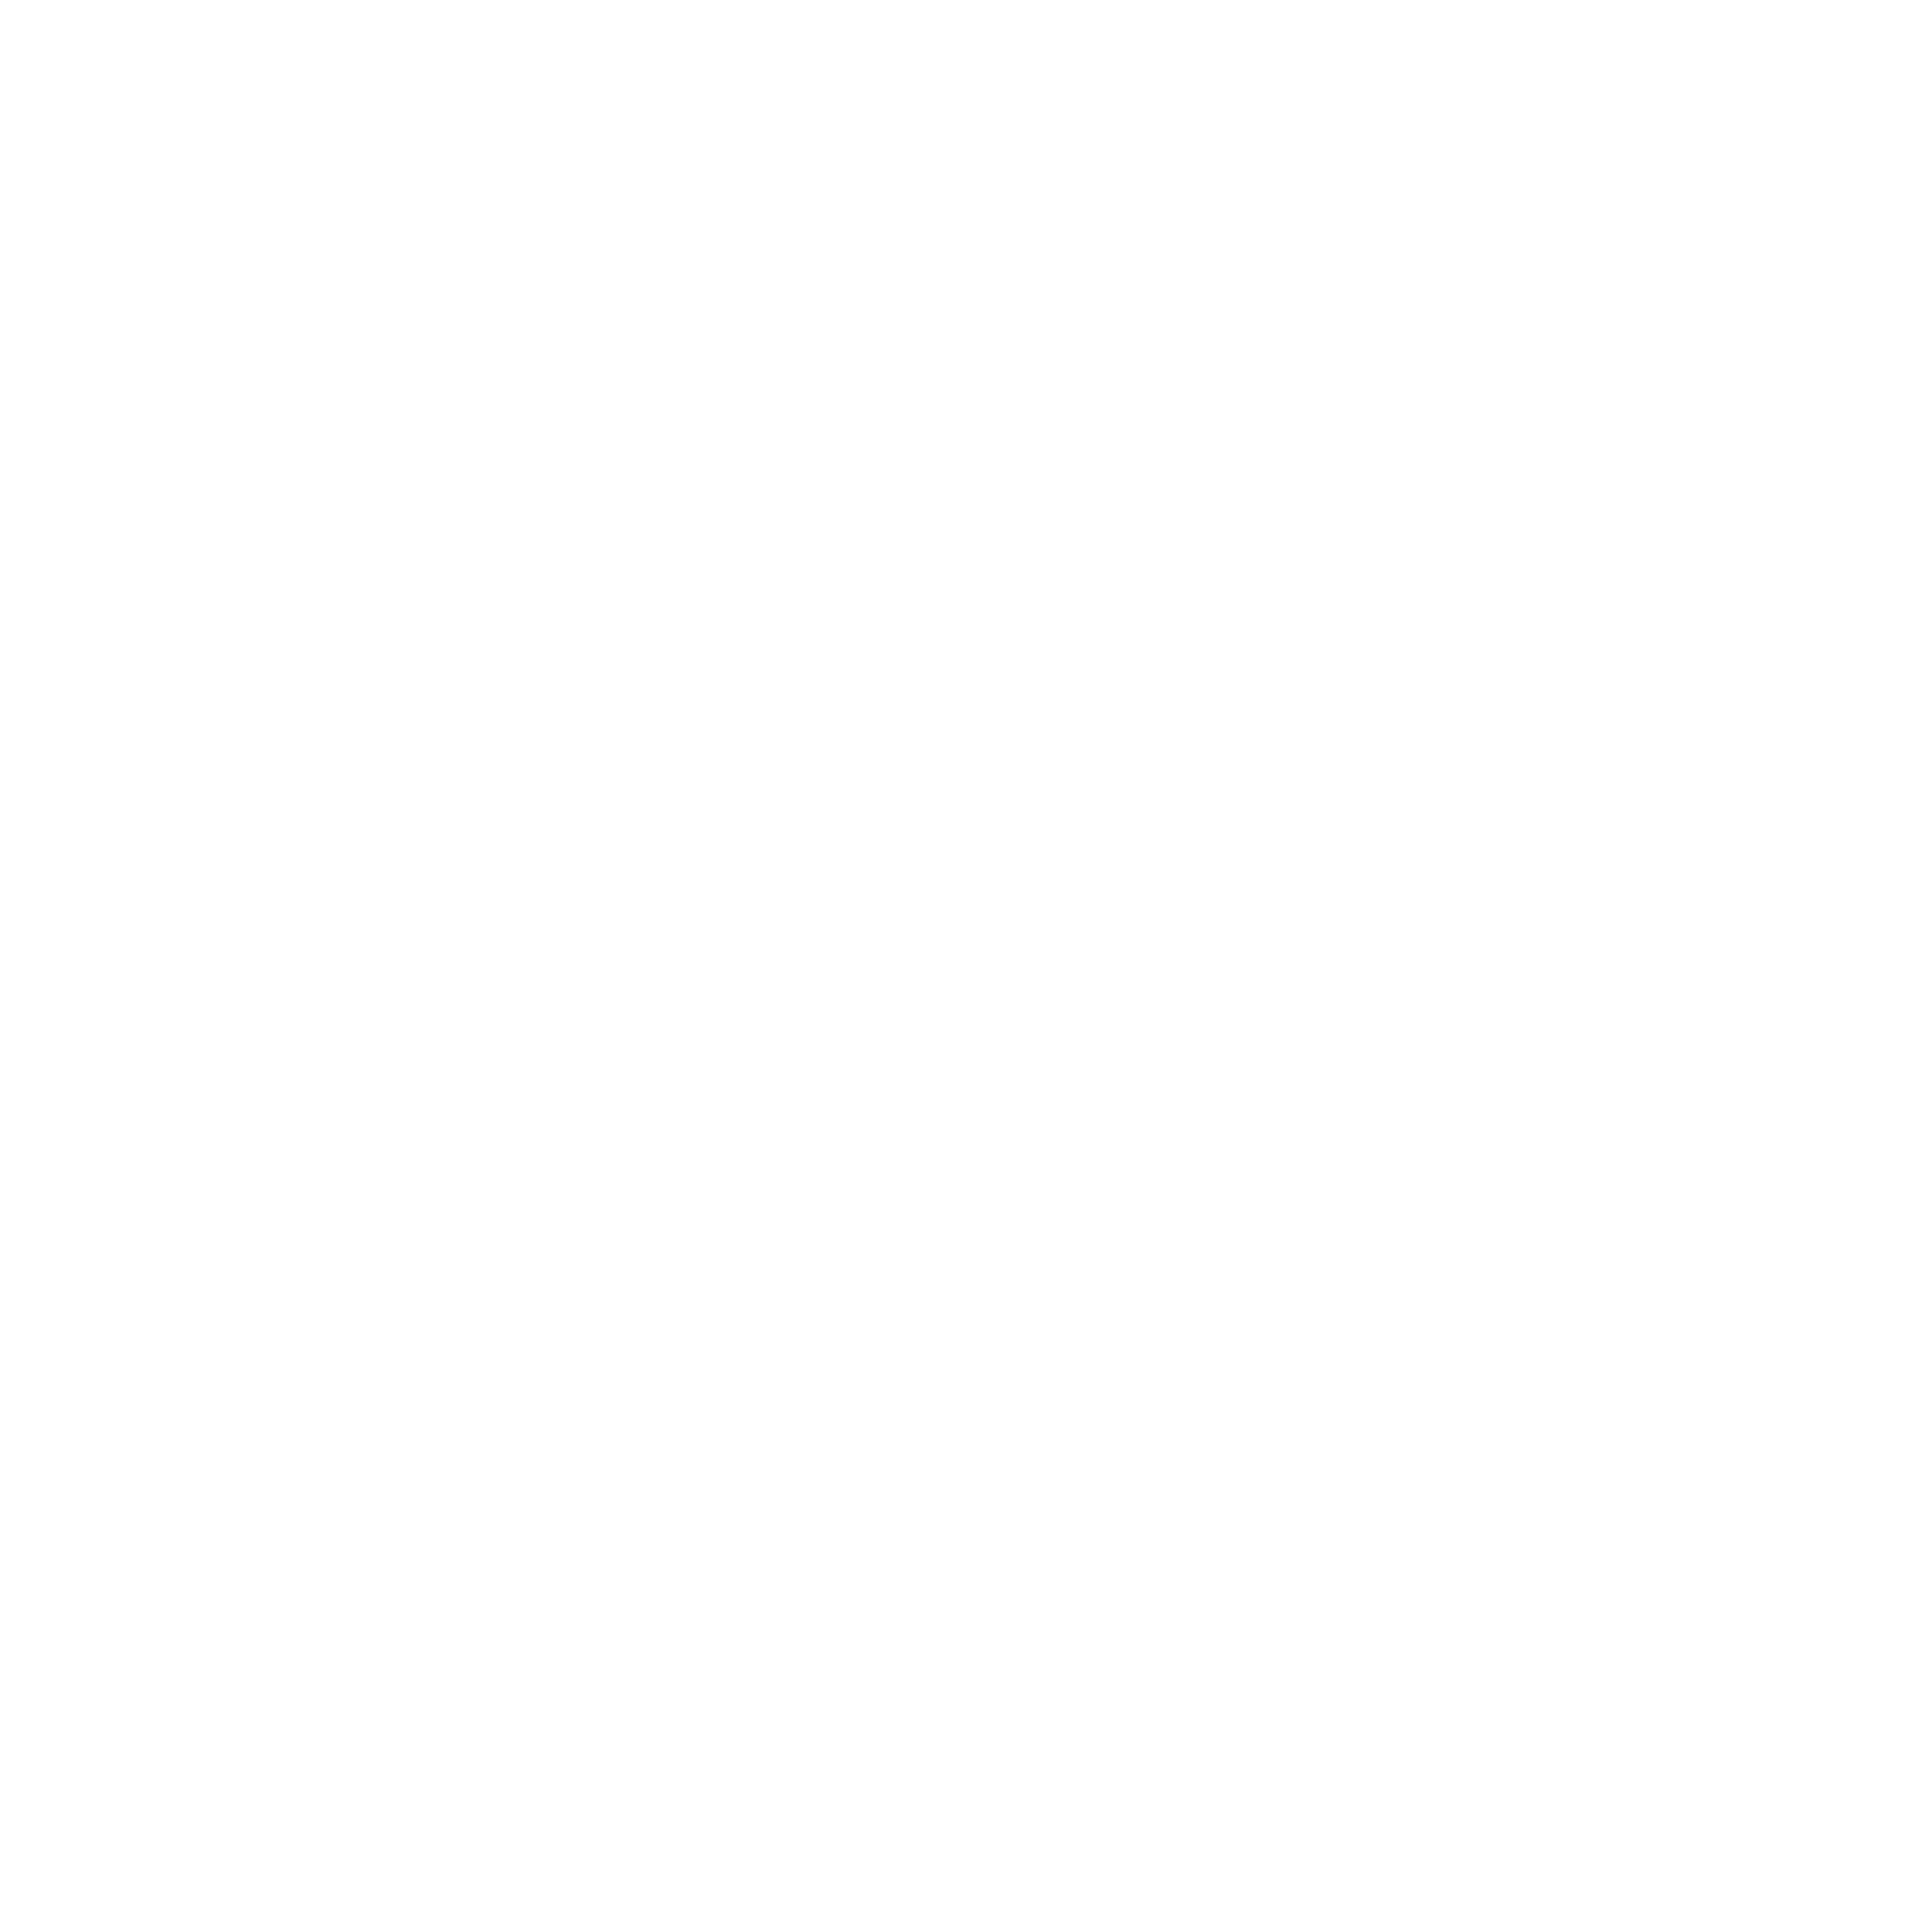 Bodleian Libraries, University of Oxford